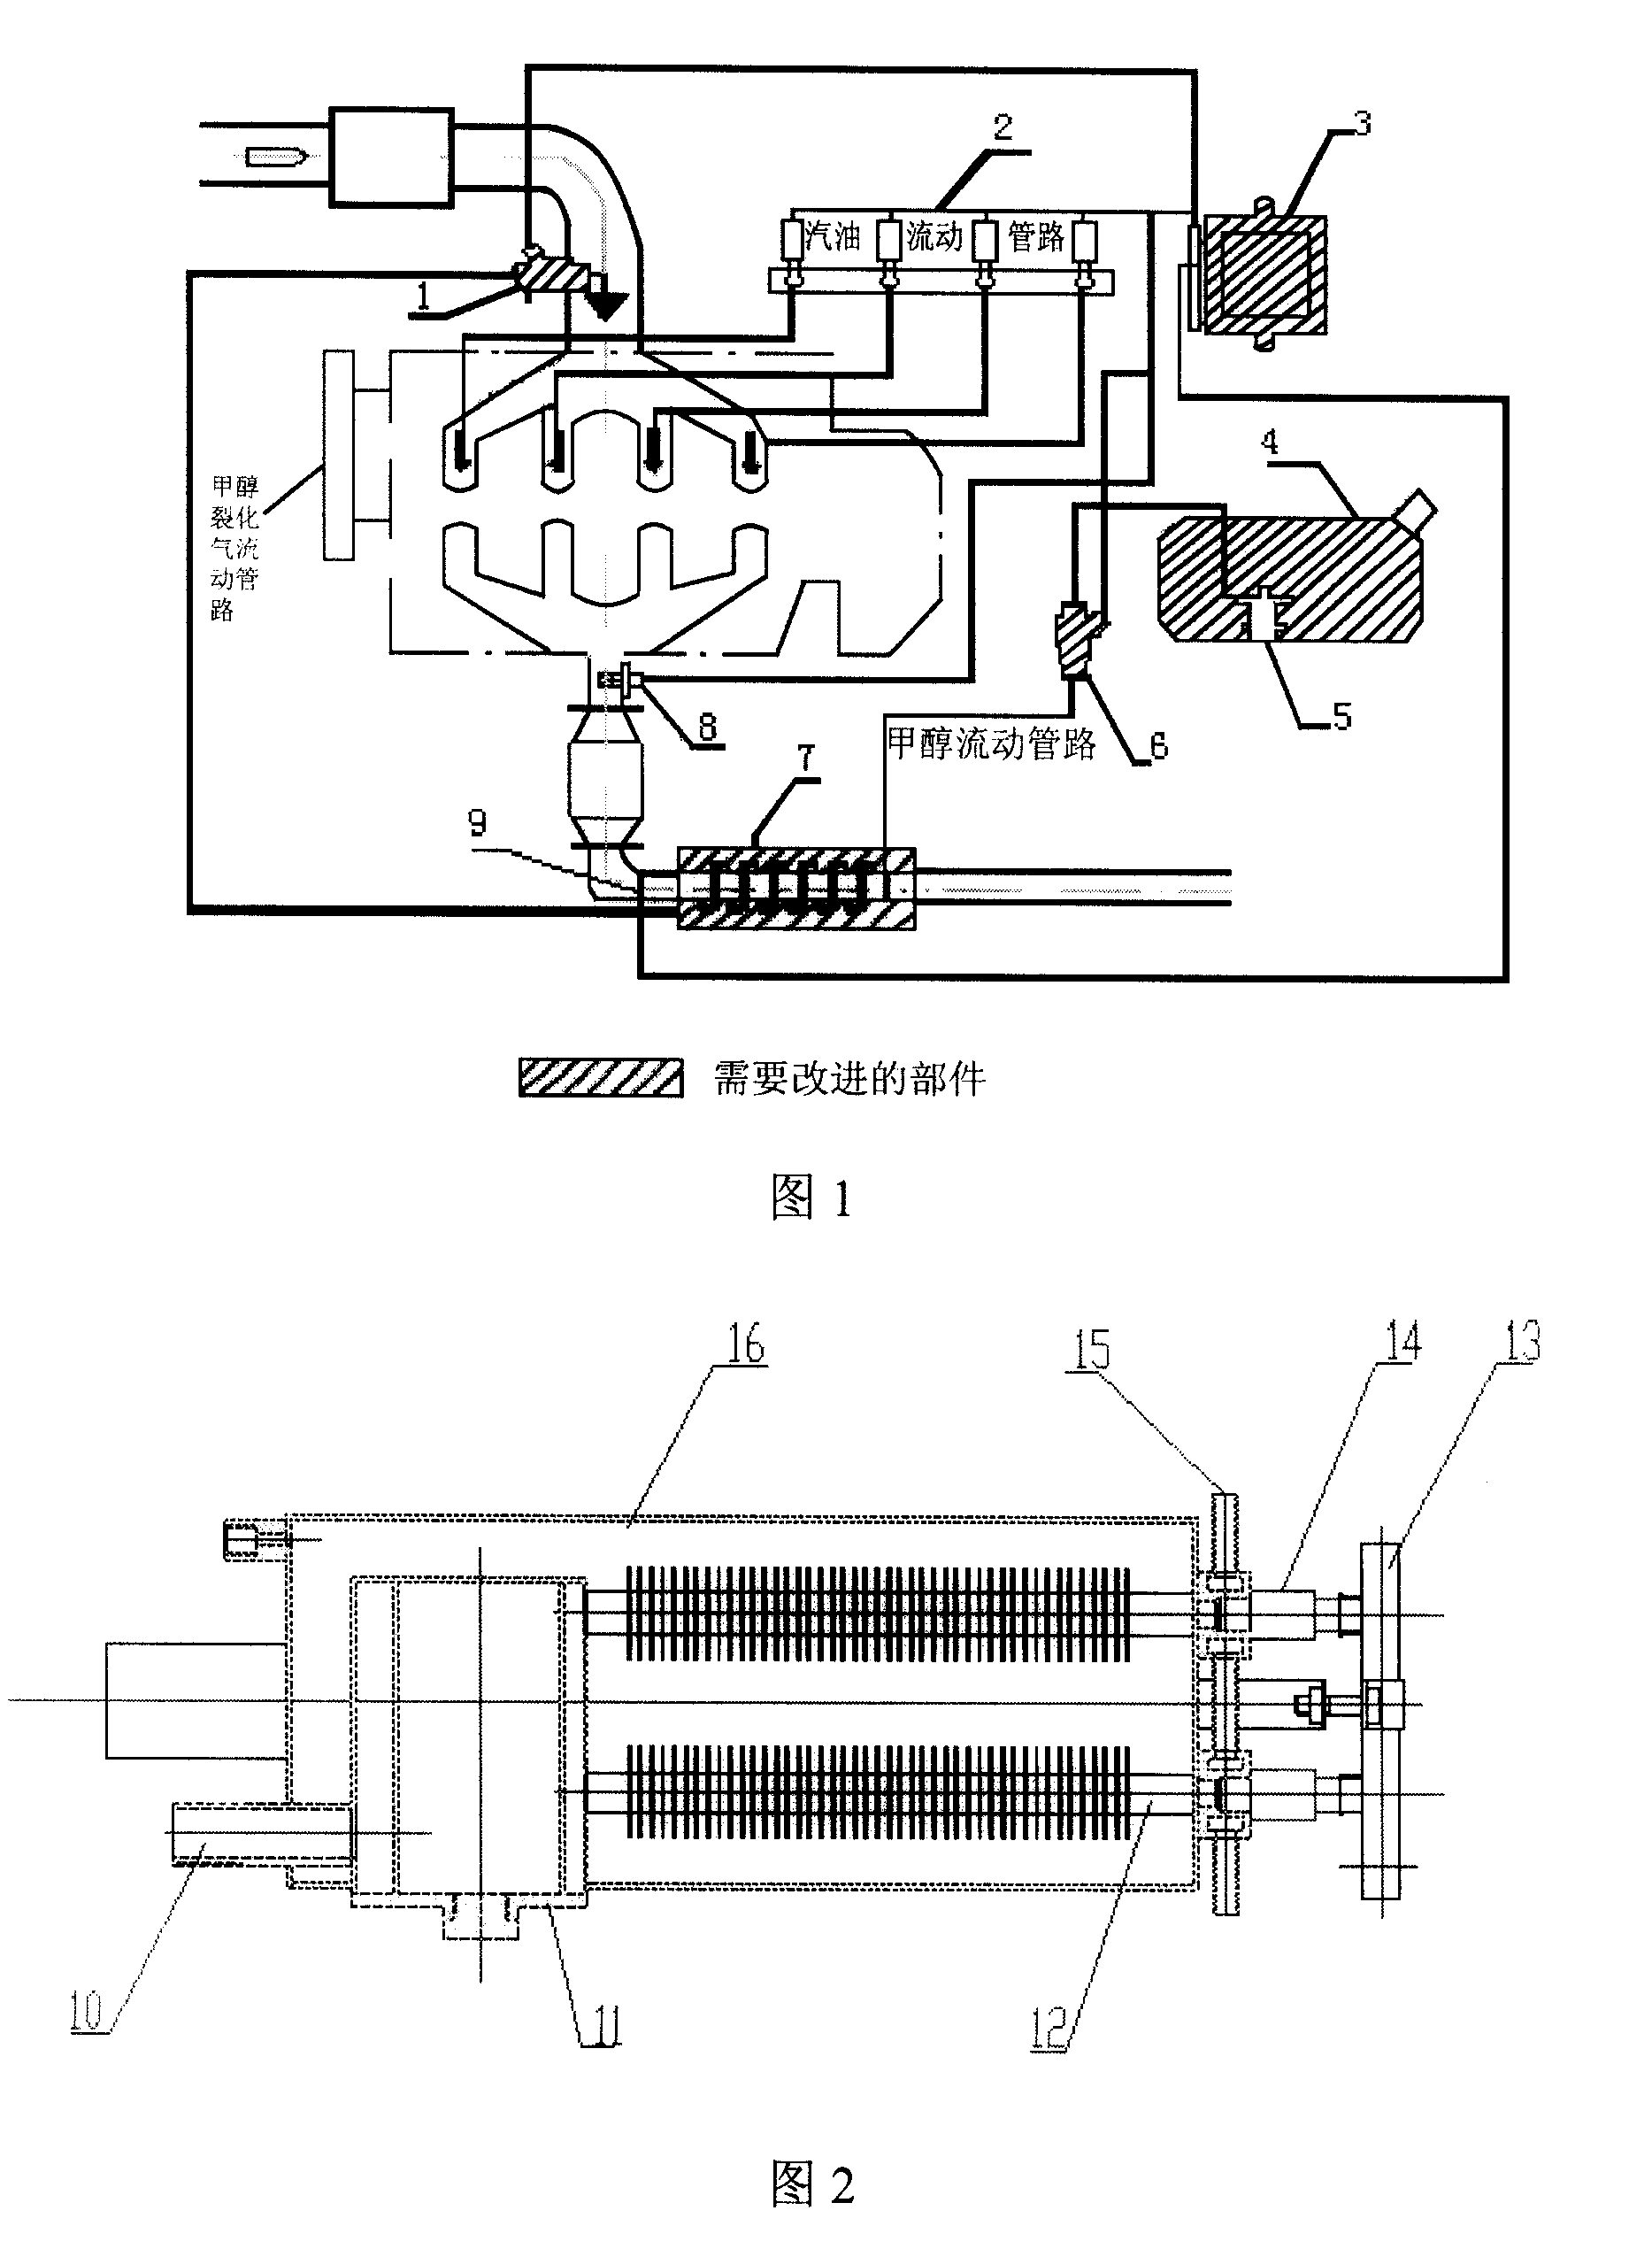 Apparatus for petrol engine combustion methanol cracking gas